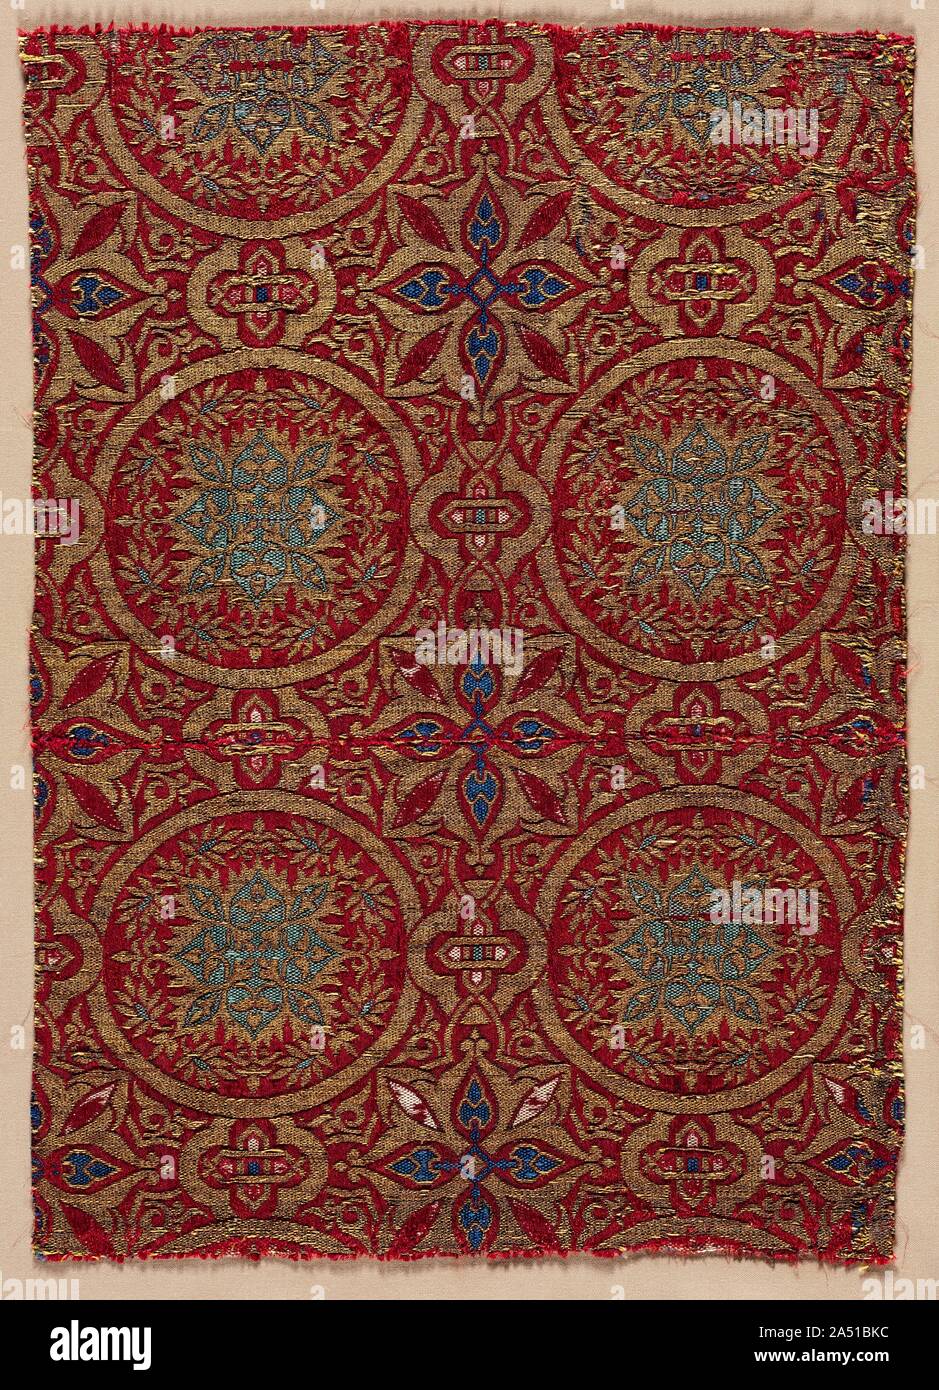 Lampas with foliate roundels, 1300s. This textile shows the development of the Hispano-Moresque style in the 1300s. The bright green, blue, white, and gold design against a rich red ground produces a jewel-like quality that was not seen again after the end of the century. Stock Photo